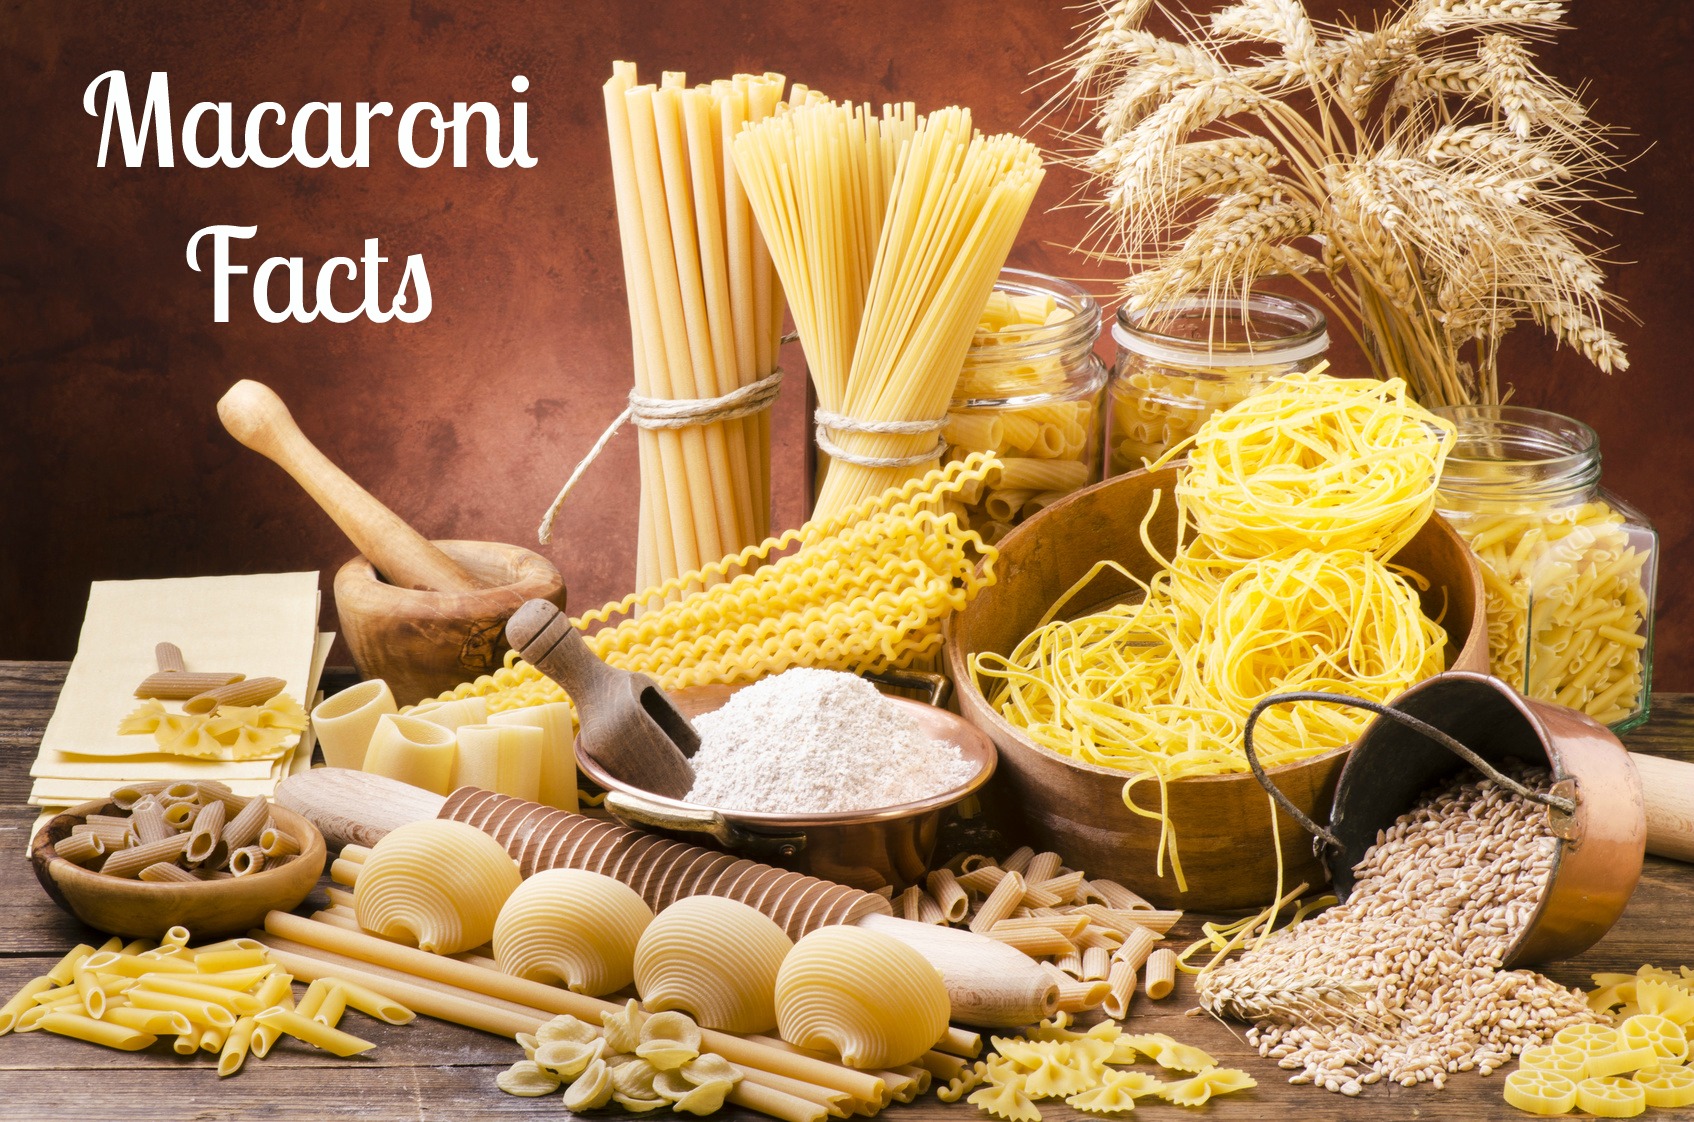 Macaroni  and pasta facts